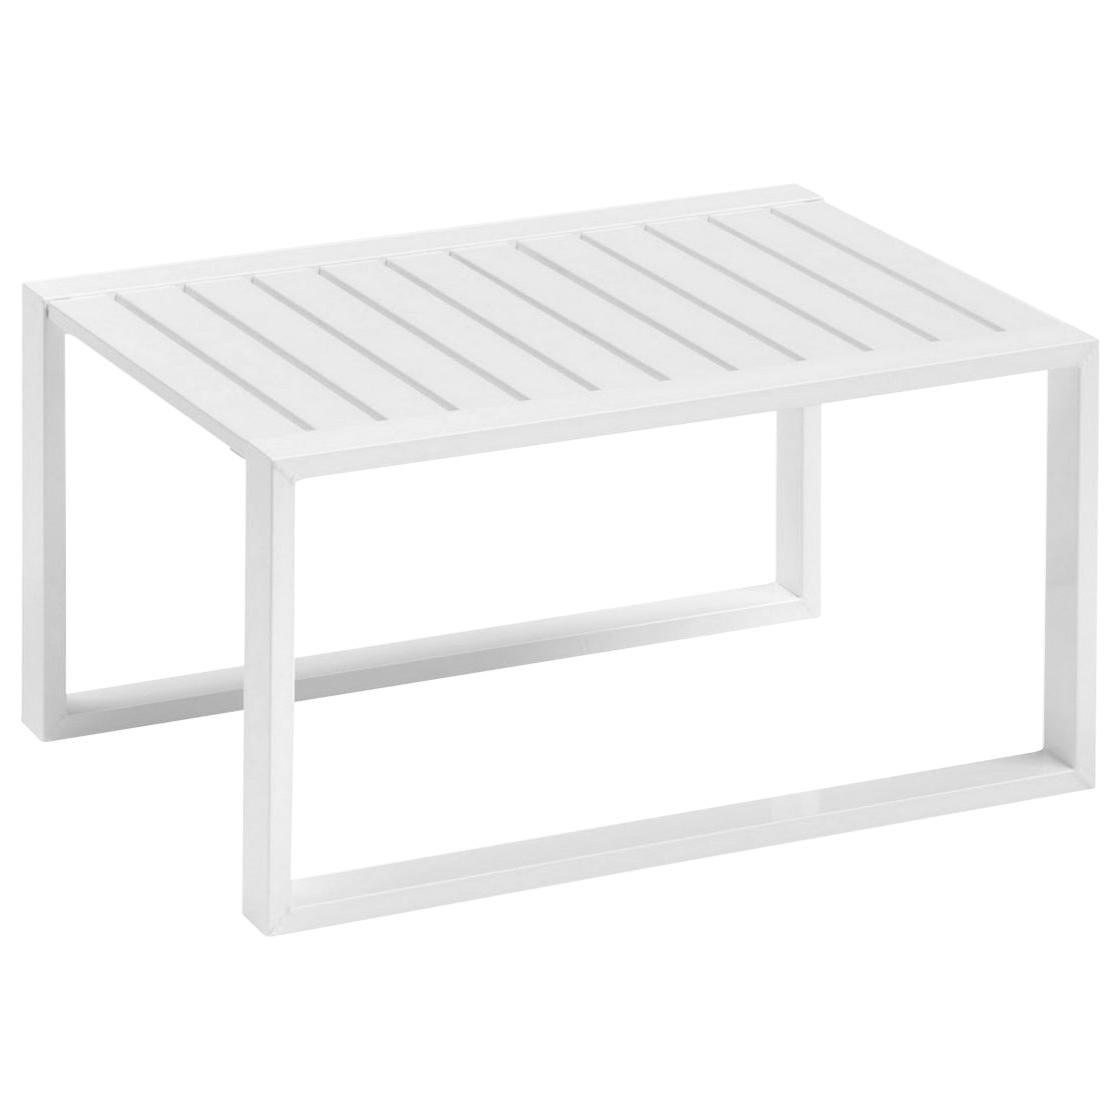 In Stock in Los Angeles, Urano White Lacquered Aluminium Outdoor Coffee Table 